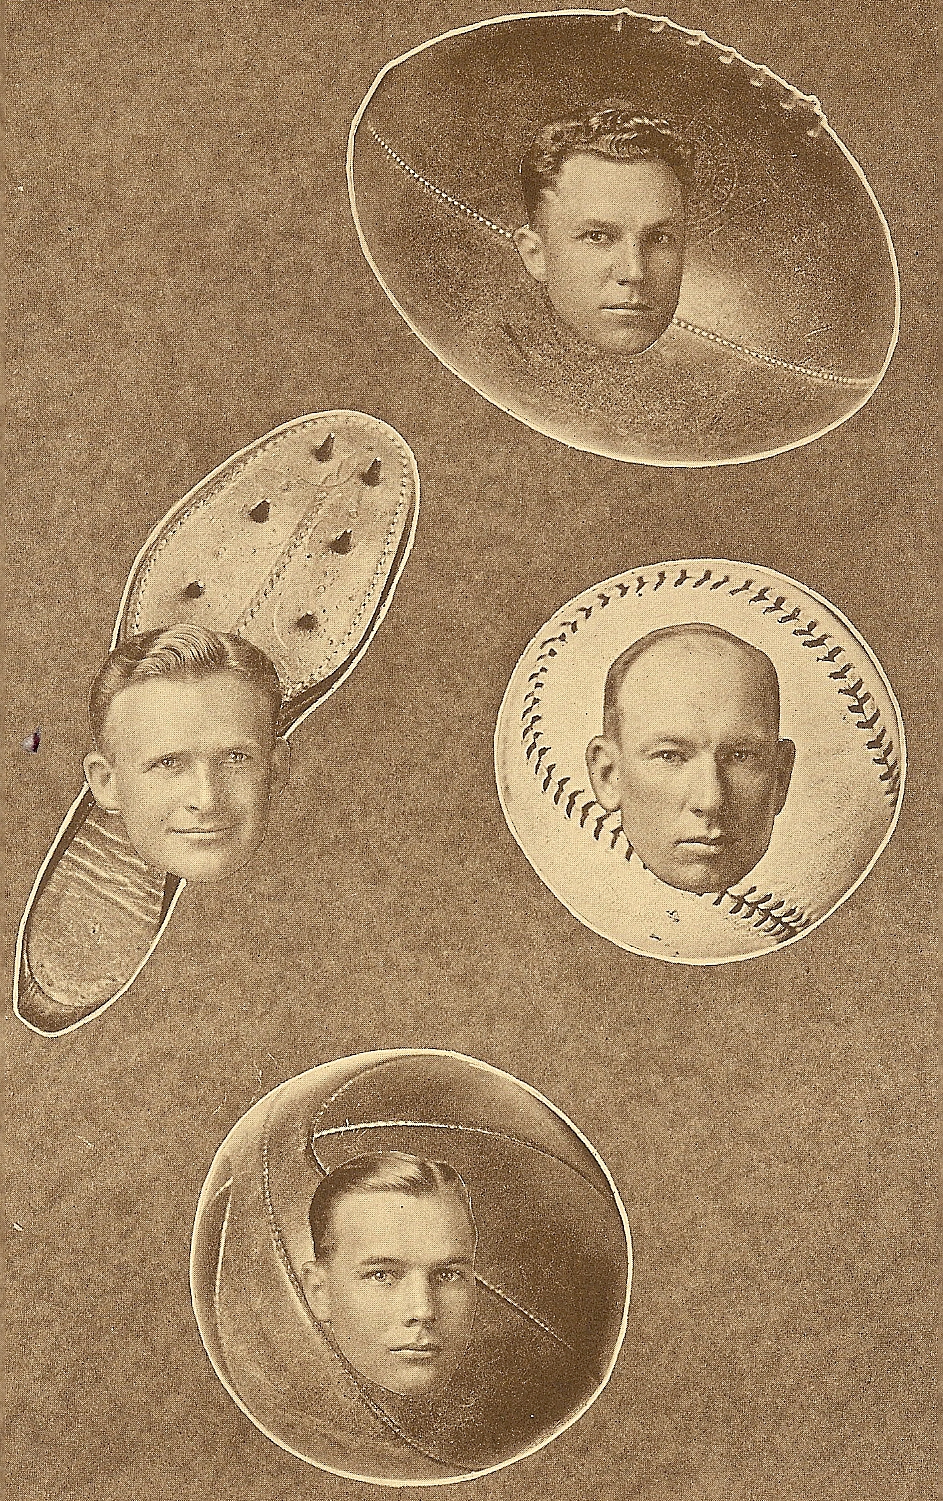 The 1927 Russ yearbook editor's vision of San Diego High coaches (clockwise from top): John Perry, Dewey (Mike) Morrow, John Hobbs, Glenn Broderick.